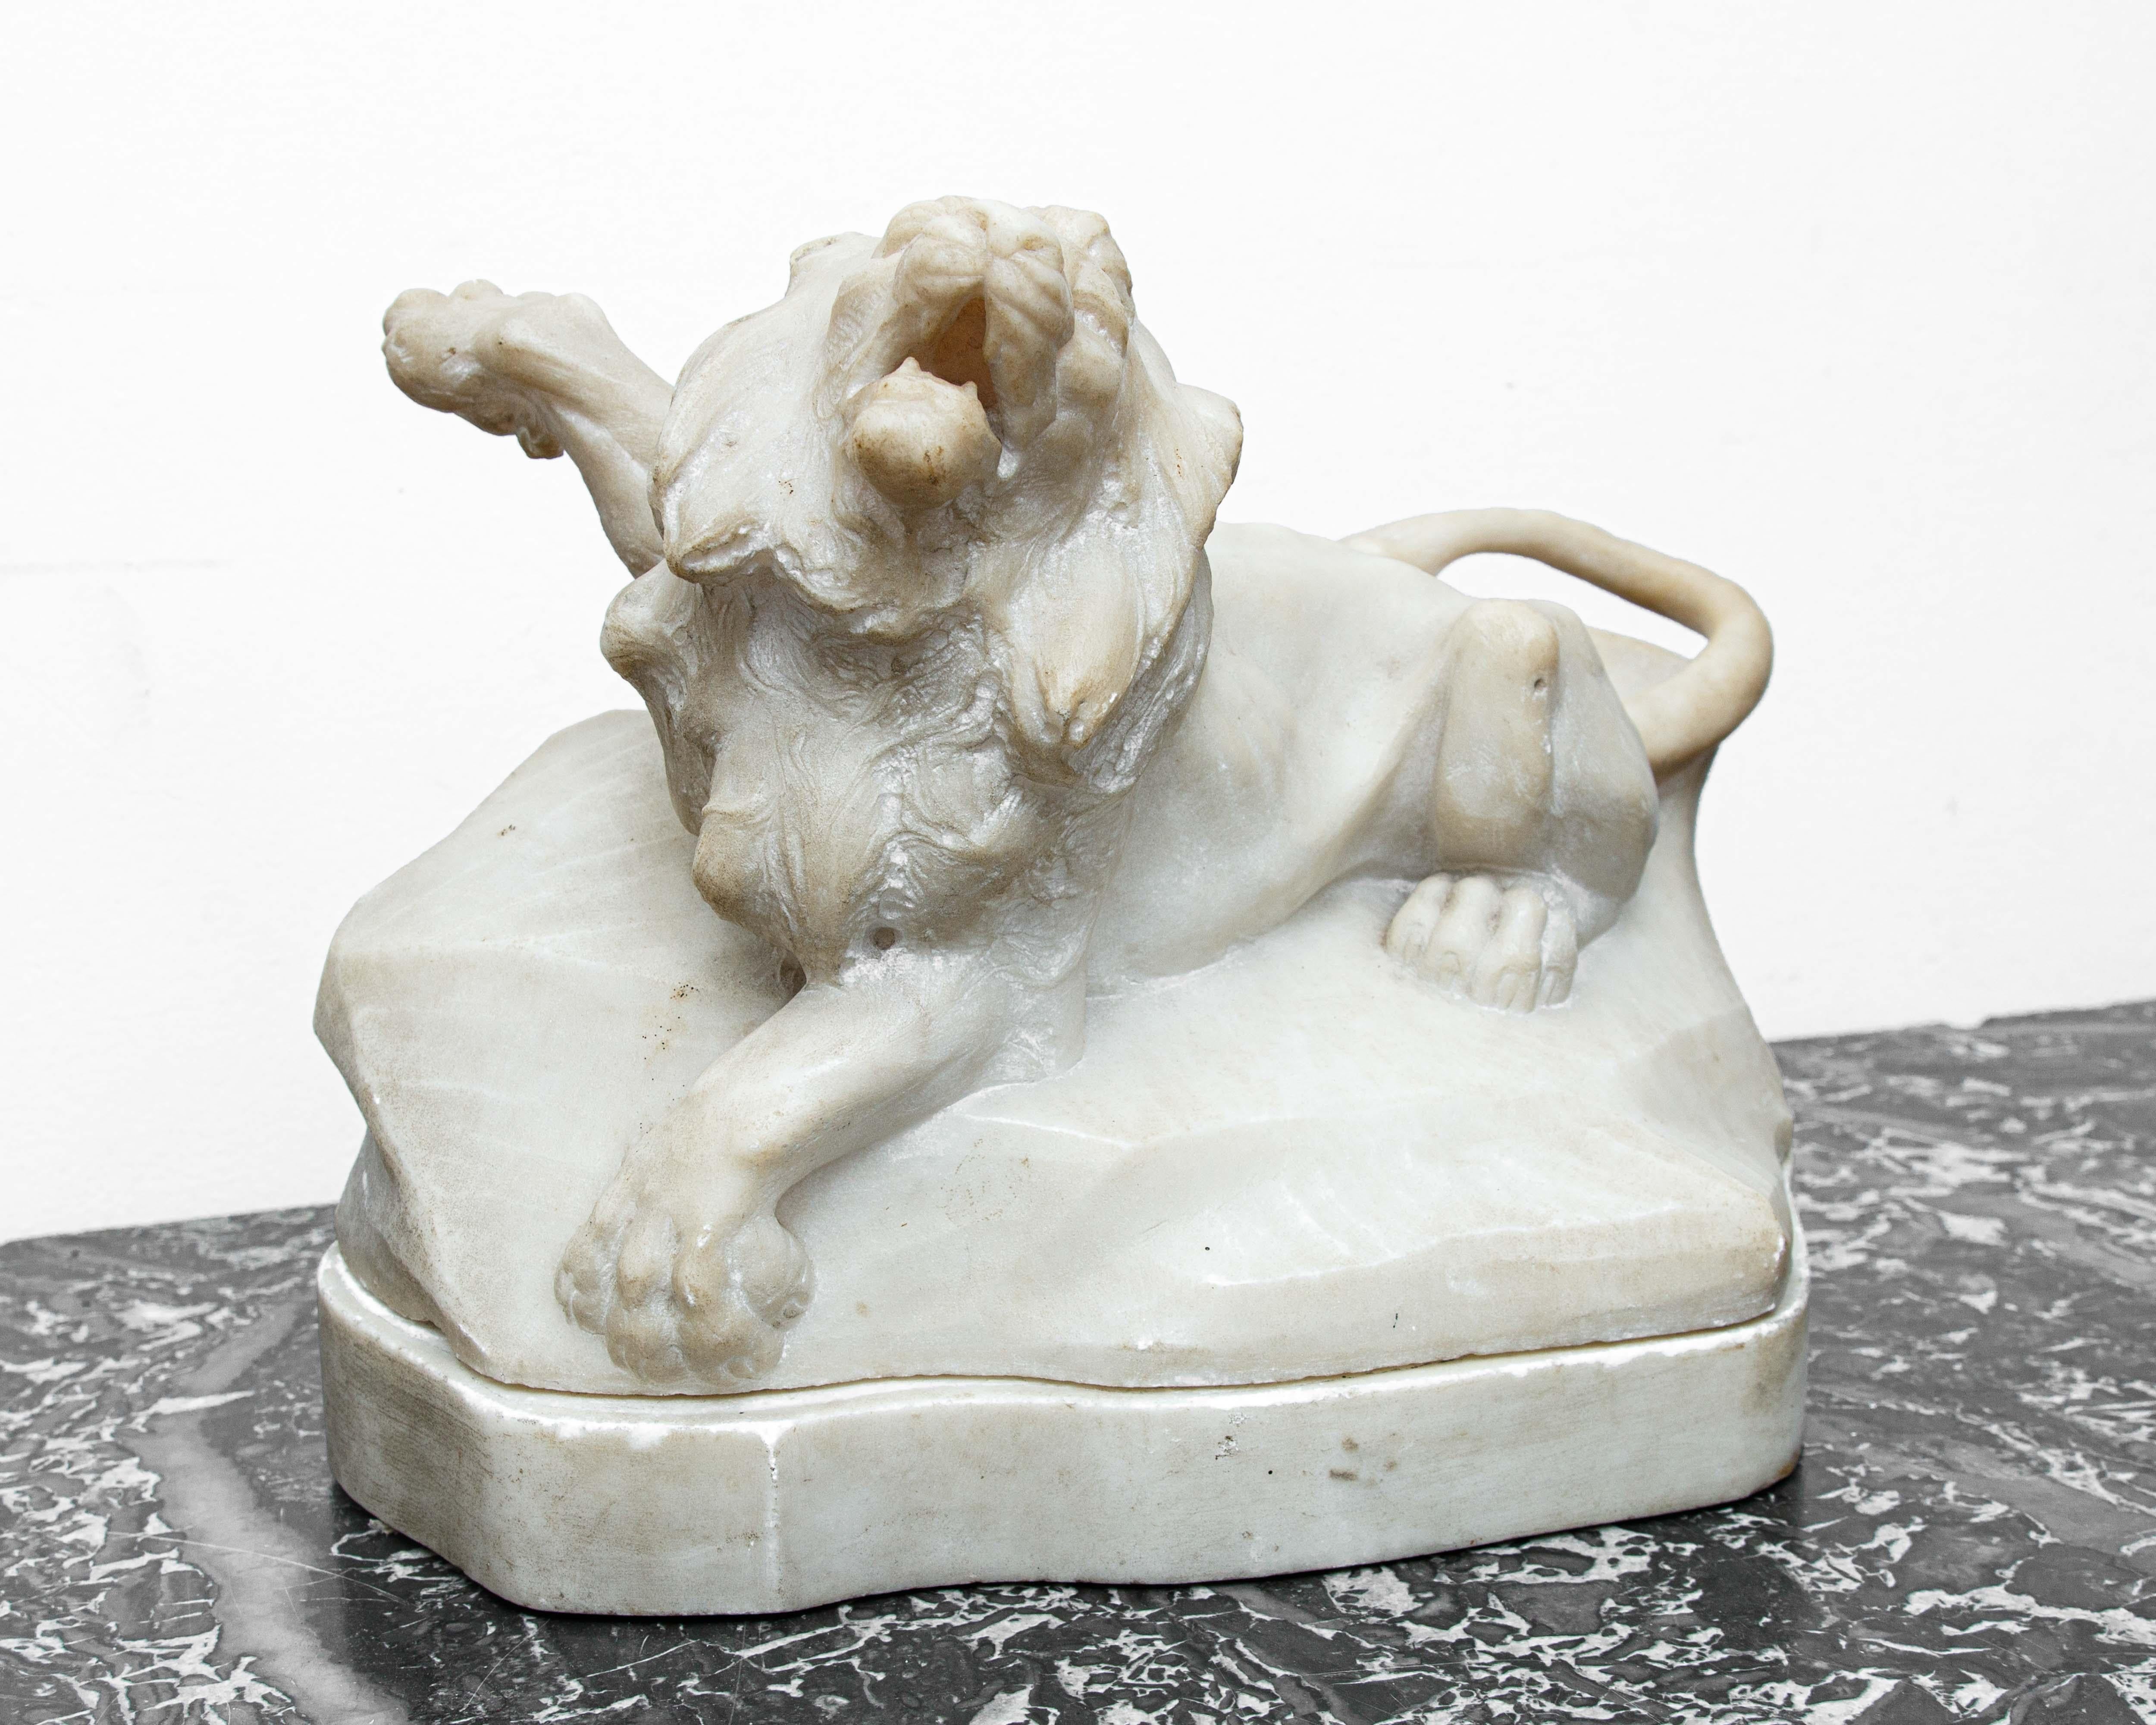 XVII Century

Lion

Marble, 30 x 43 x 25

The object under consideration is configured as a marble sculpture referable to the 17th century, characterized by a strong, visceral language, seeking effect and the attention of the observer: a poetics